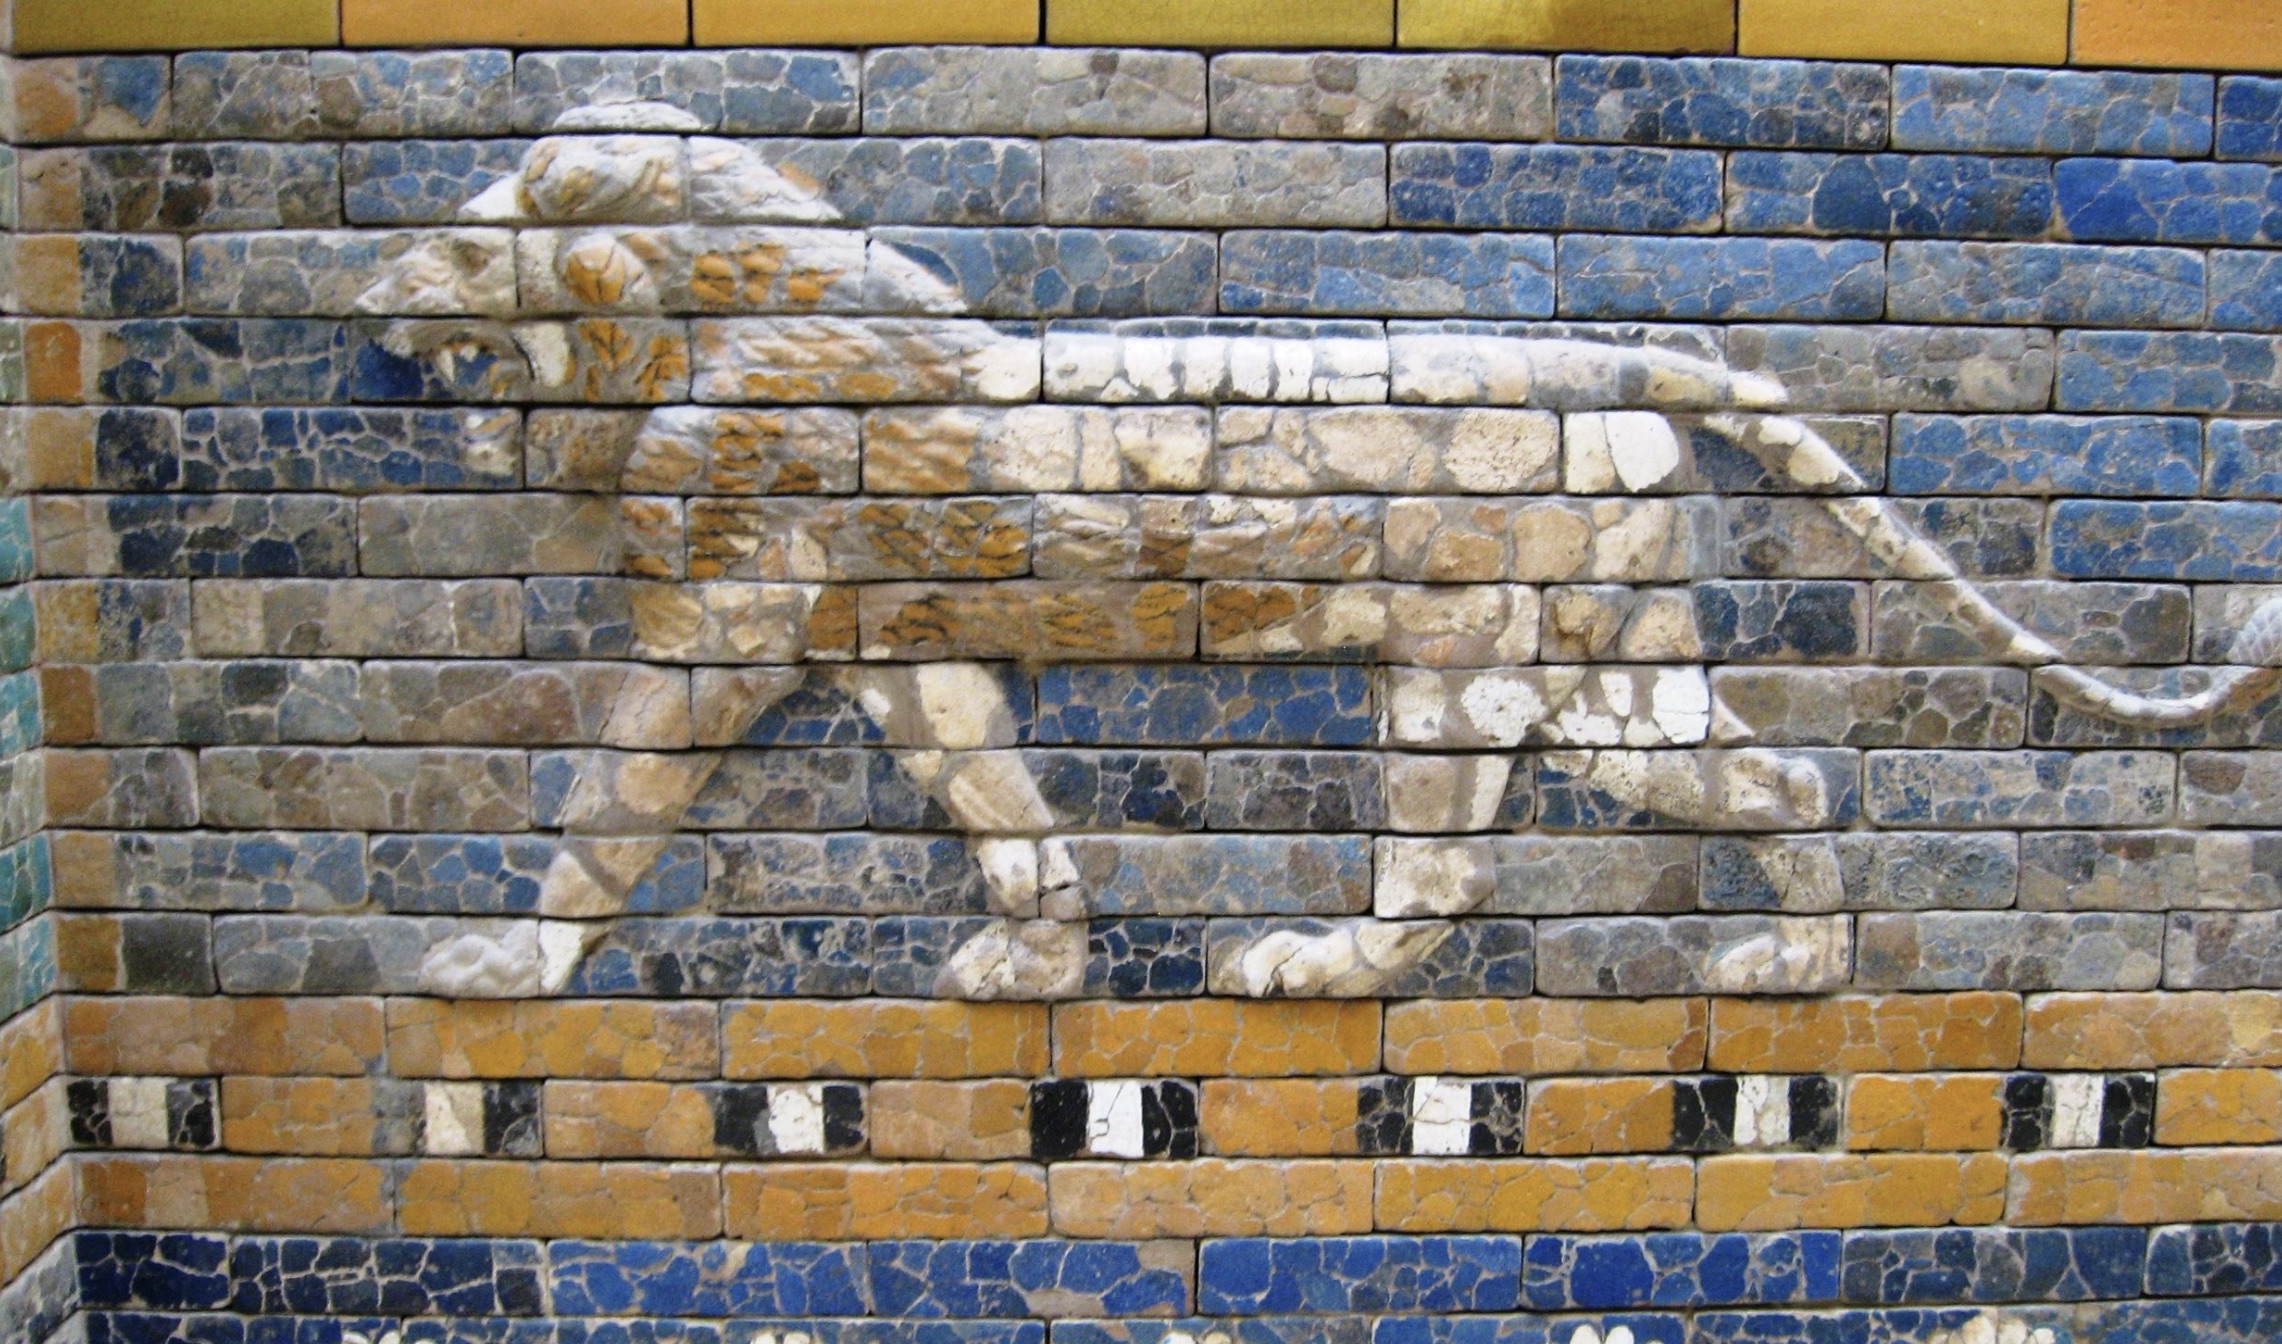 Lions were one of Inanna:Ishtar's primary symbols